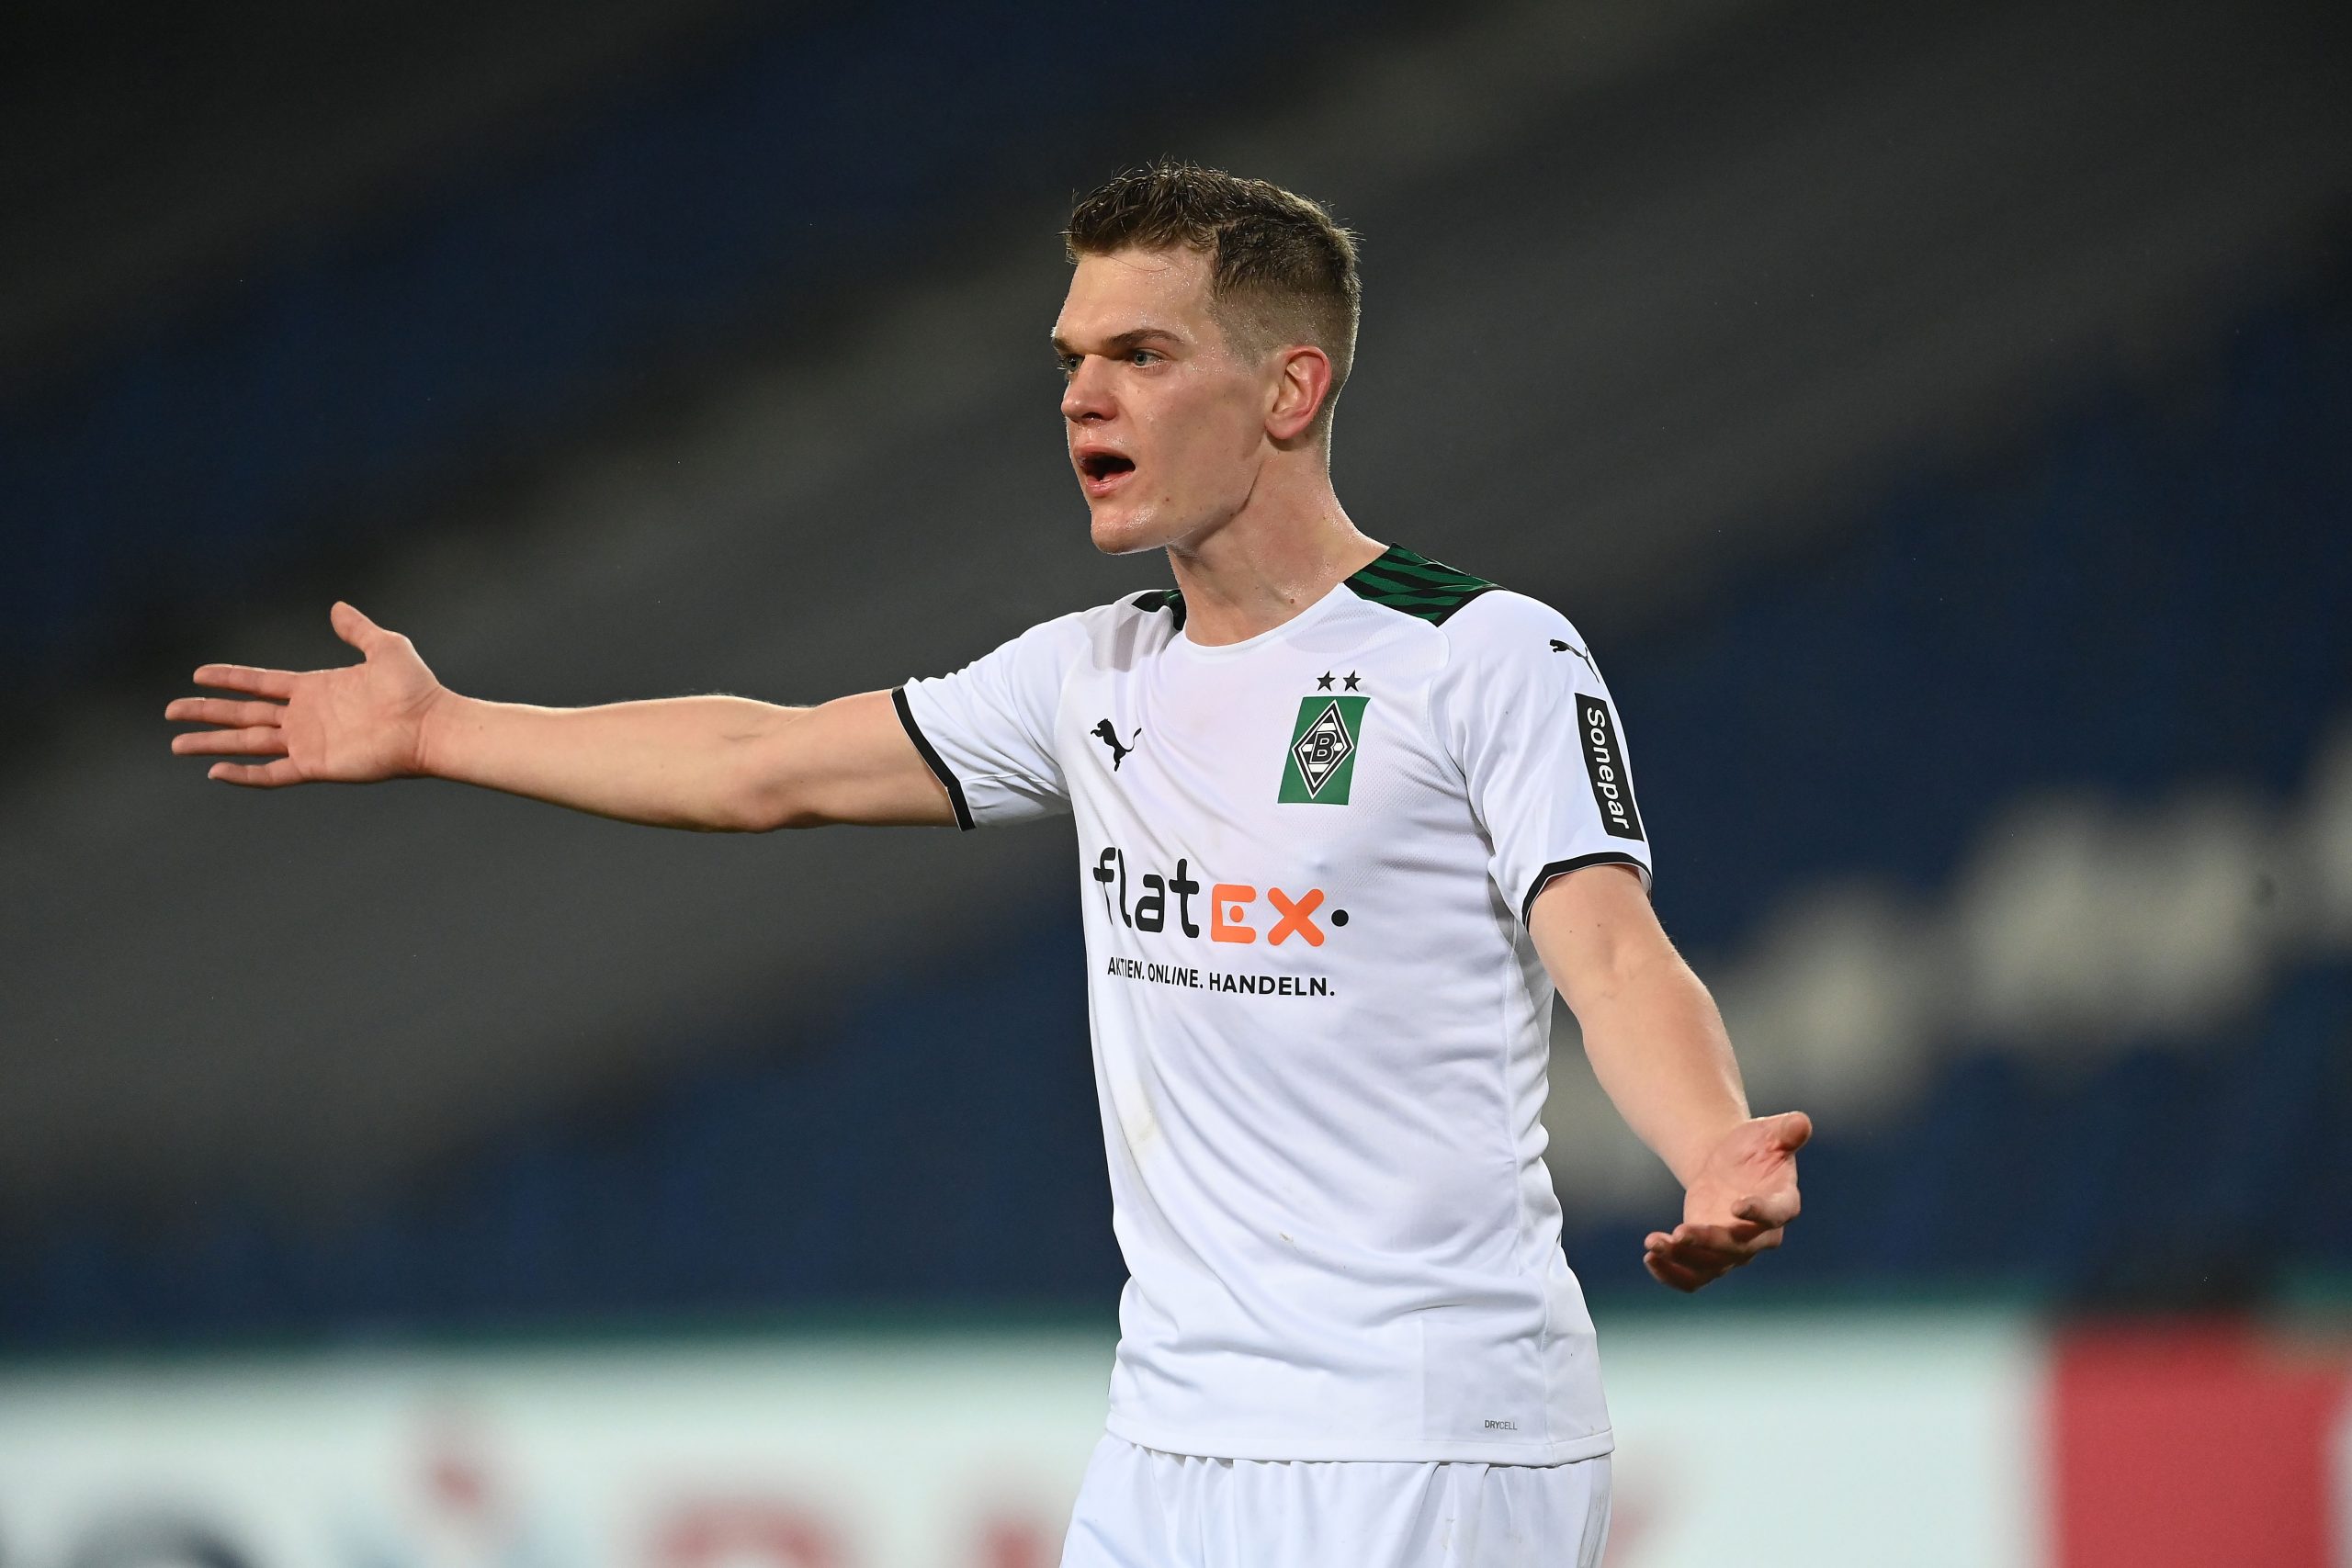 Matthias Ginter has agreed to join Bayern Munich. (Photo by Stuart Franklin/Getty Images)